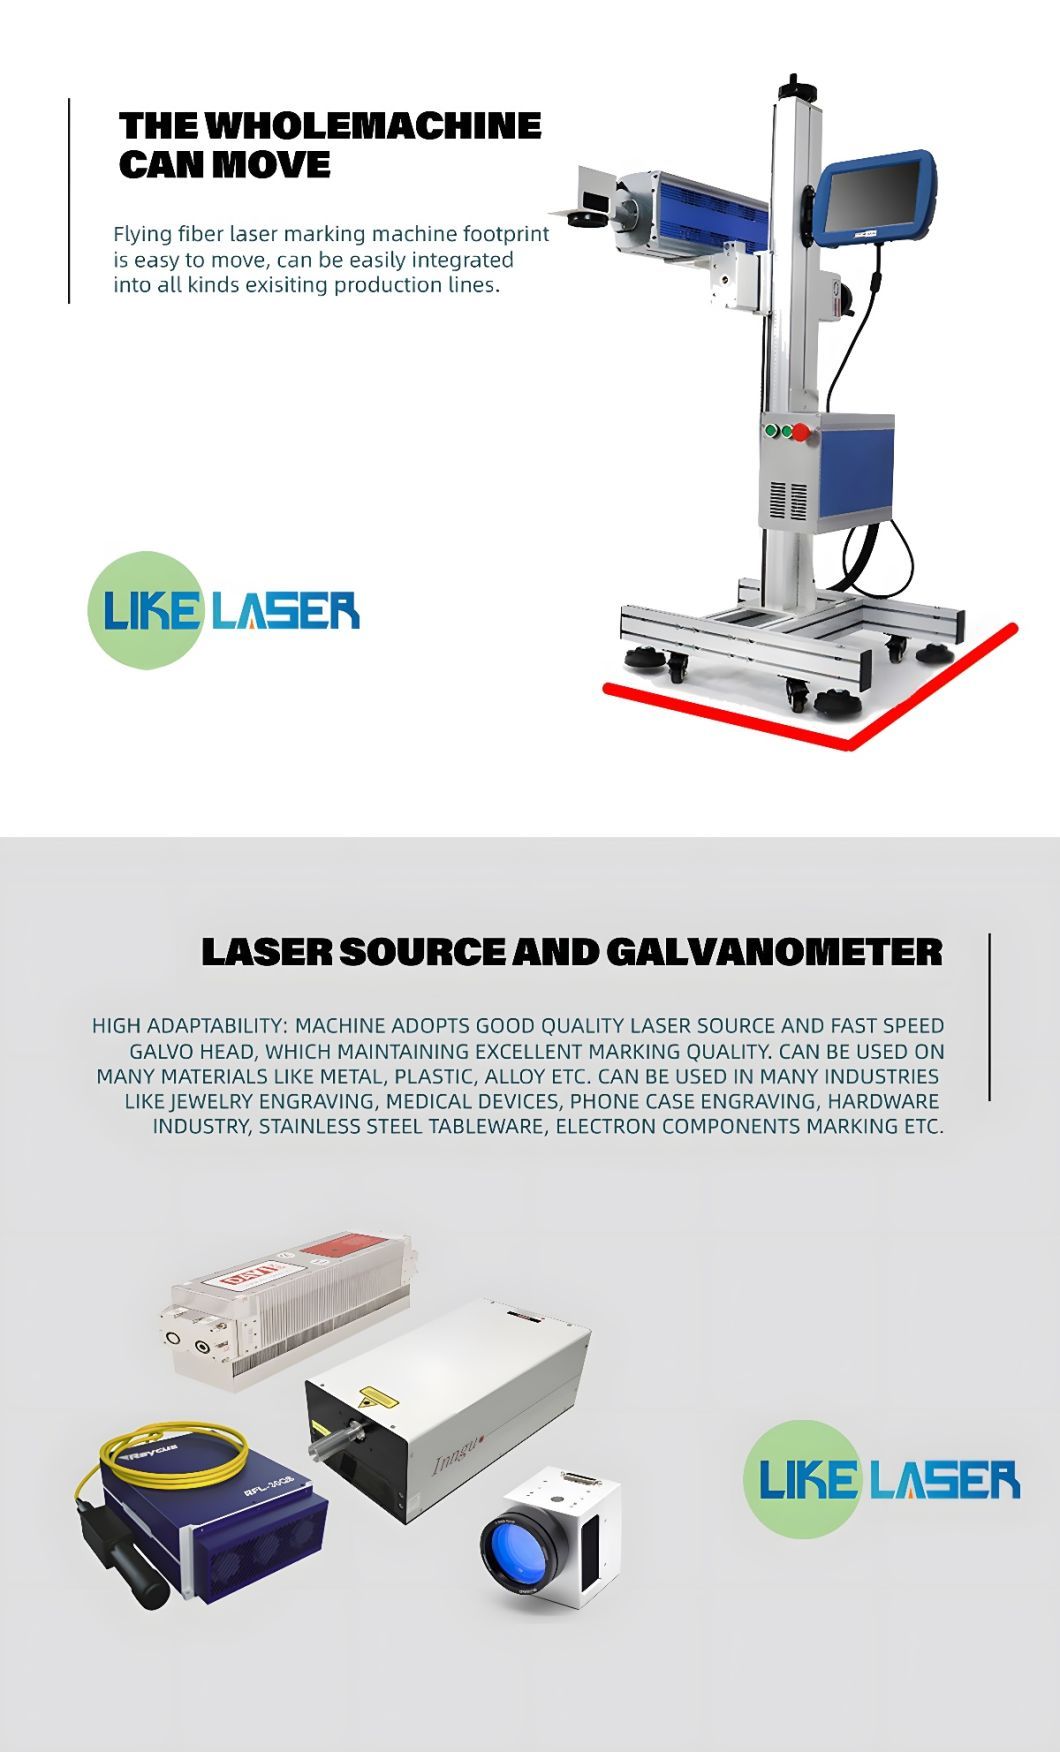 CO2 Flying Laser Marking Machine Is Used to Mark The Production Date and Qr Code of Food Packaging Bags